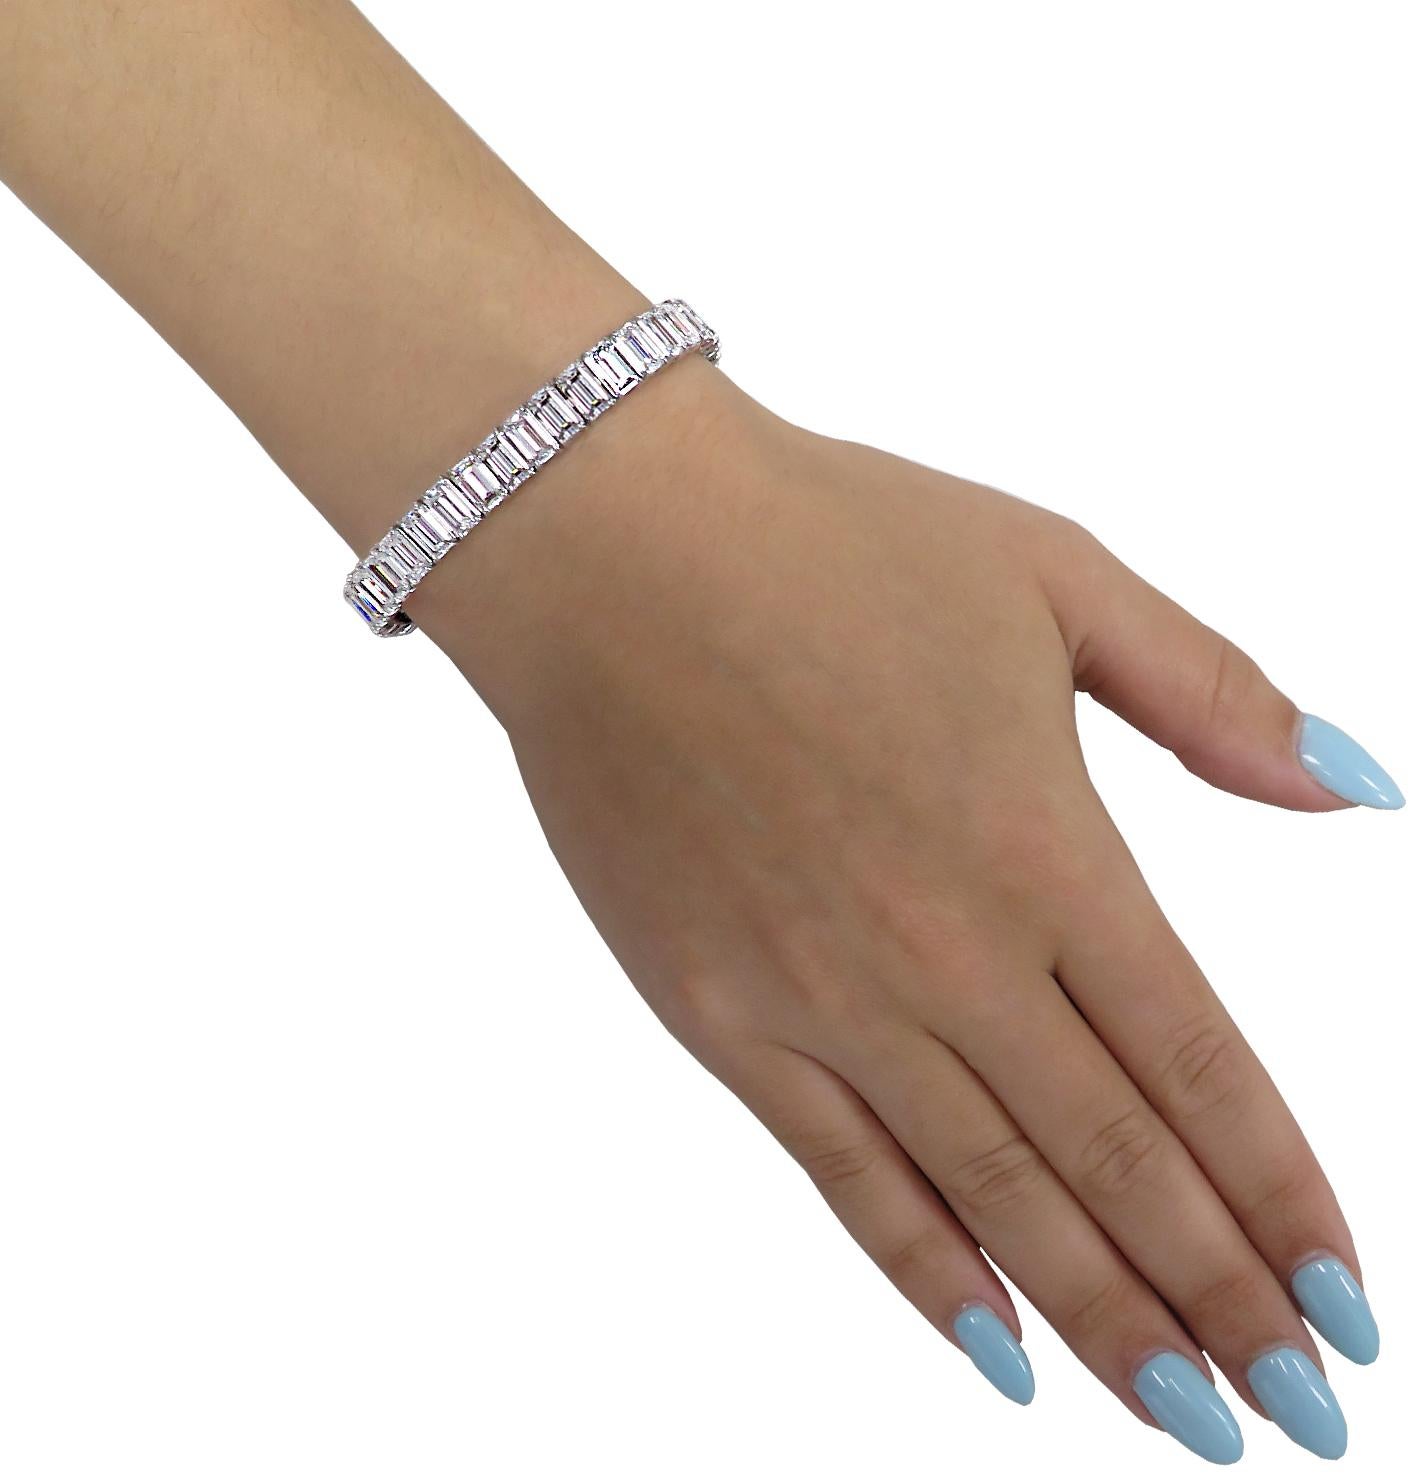 Scintillating Vivid Diamonds Emerald Cut diamond bracelet expertly crafted in platinum, showcasing 40 spectacular GIA Certified emerald cut diamonds weighing 32.10 carats total, D-H color, IF-VS2 clarity. Each diamond was carefully selected,